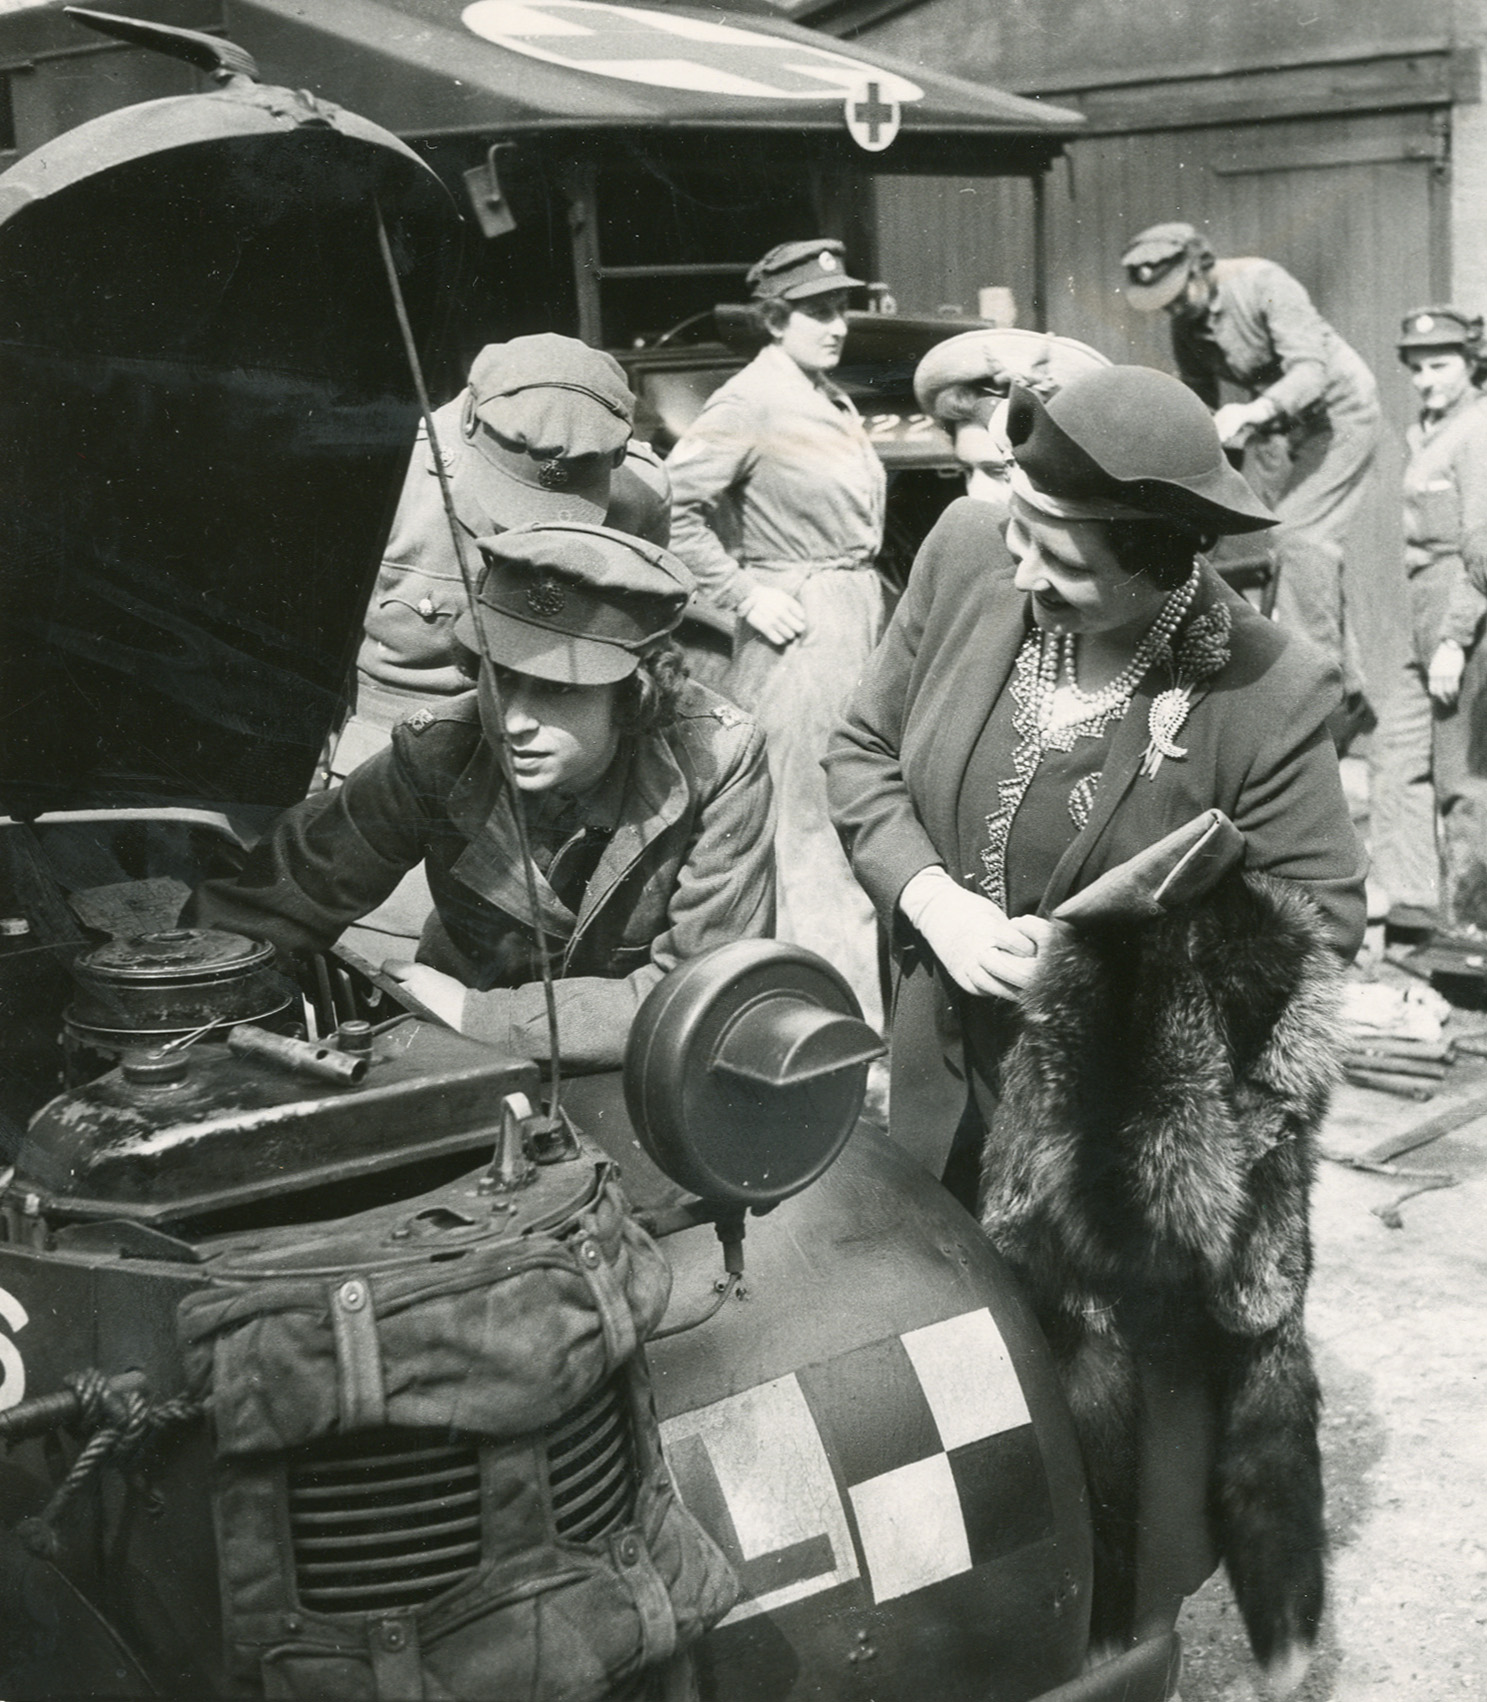 Princess Elizabeth explains to the Queen what she has done to the car engine. April, 1945. (The International Museum of World War II)